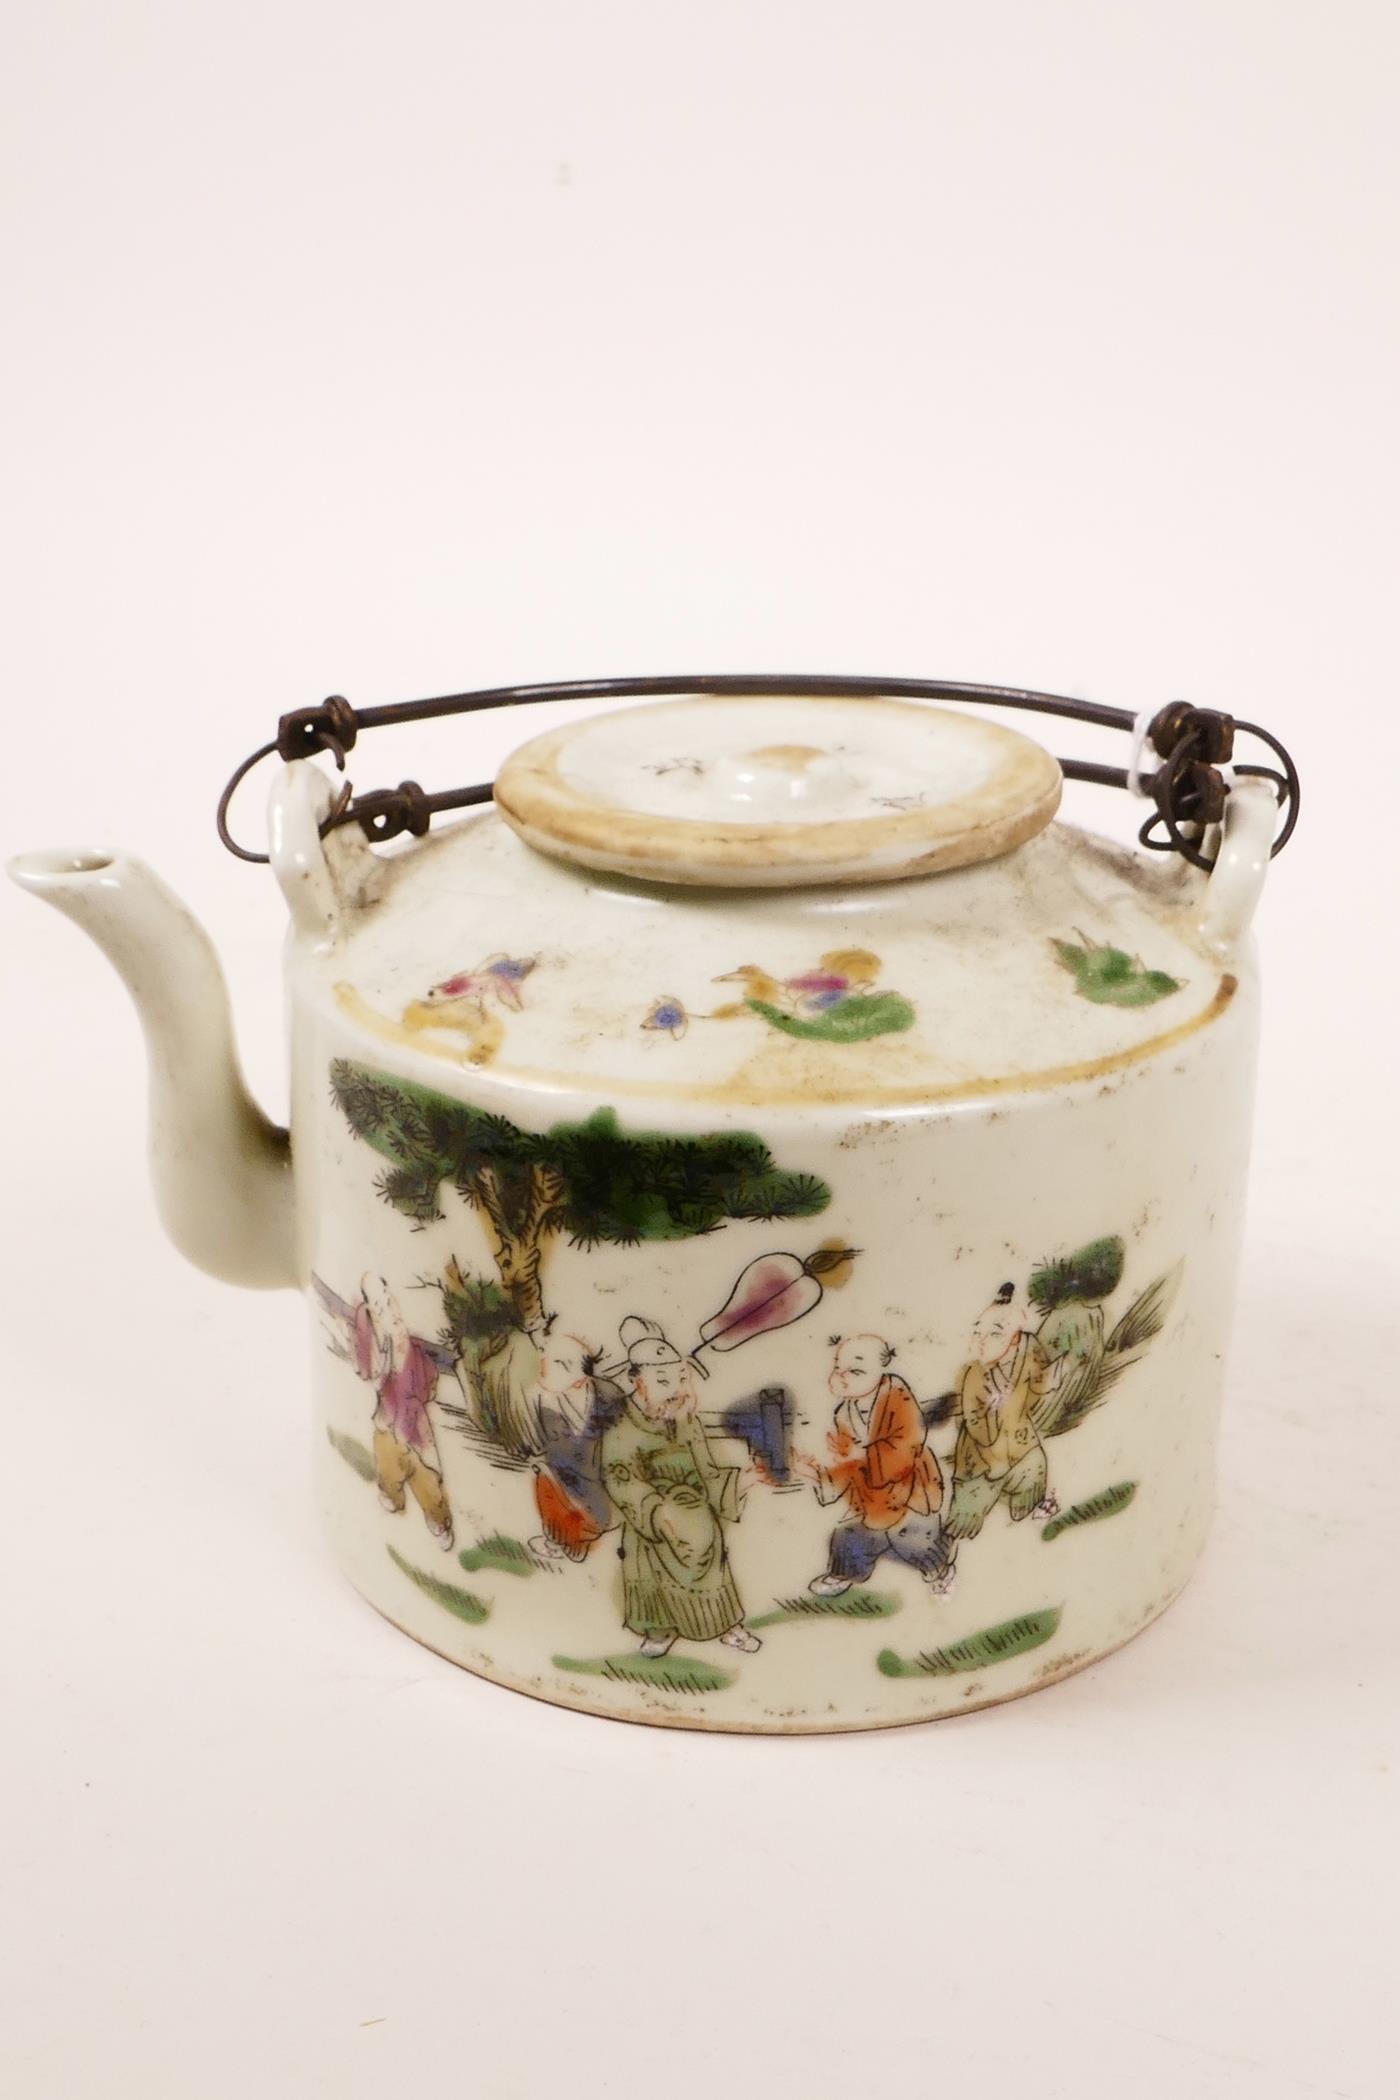 A Chinese famille verte ceramic teapot, 3½" high x 5" wide